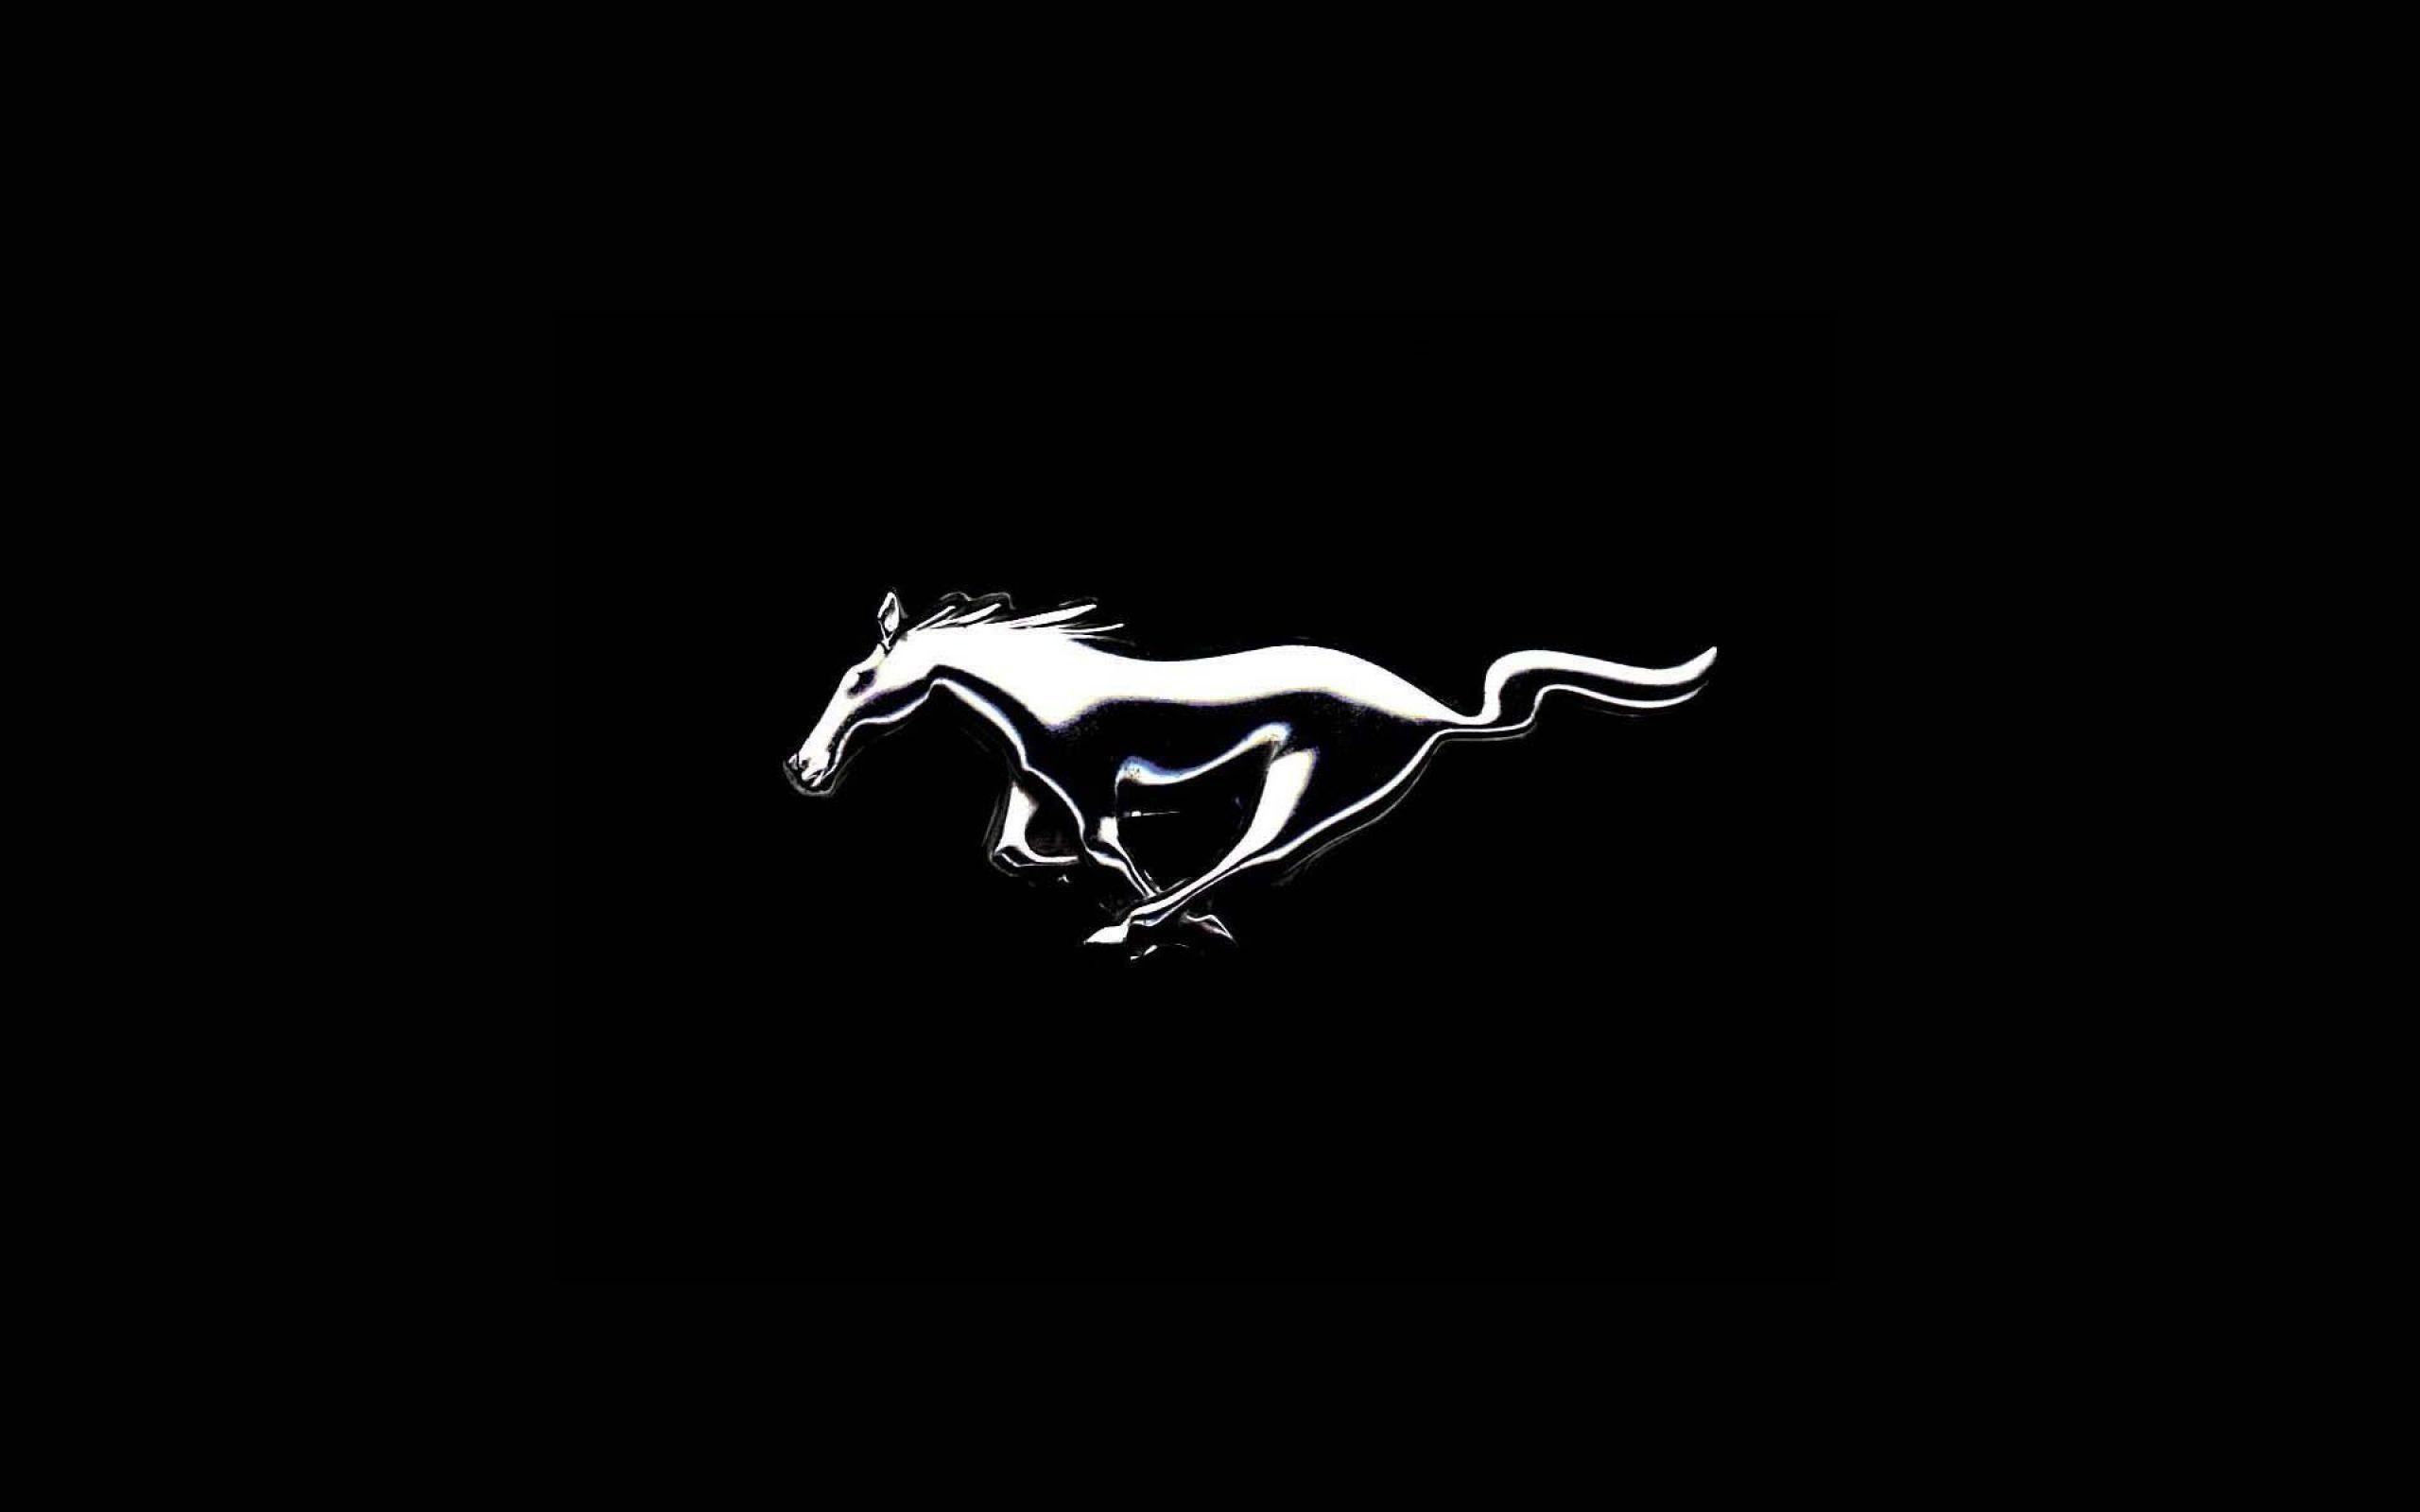 Black and White Ford Mustang Logo - Ford Mustang Logo Wallpaper ·①